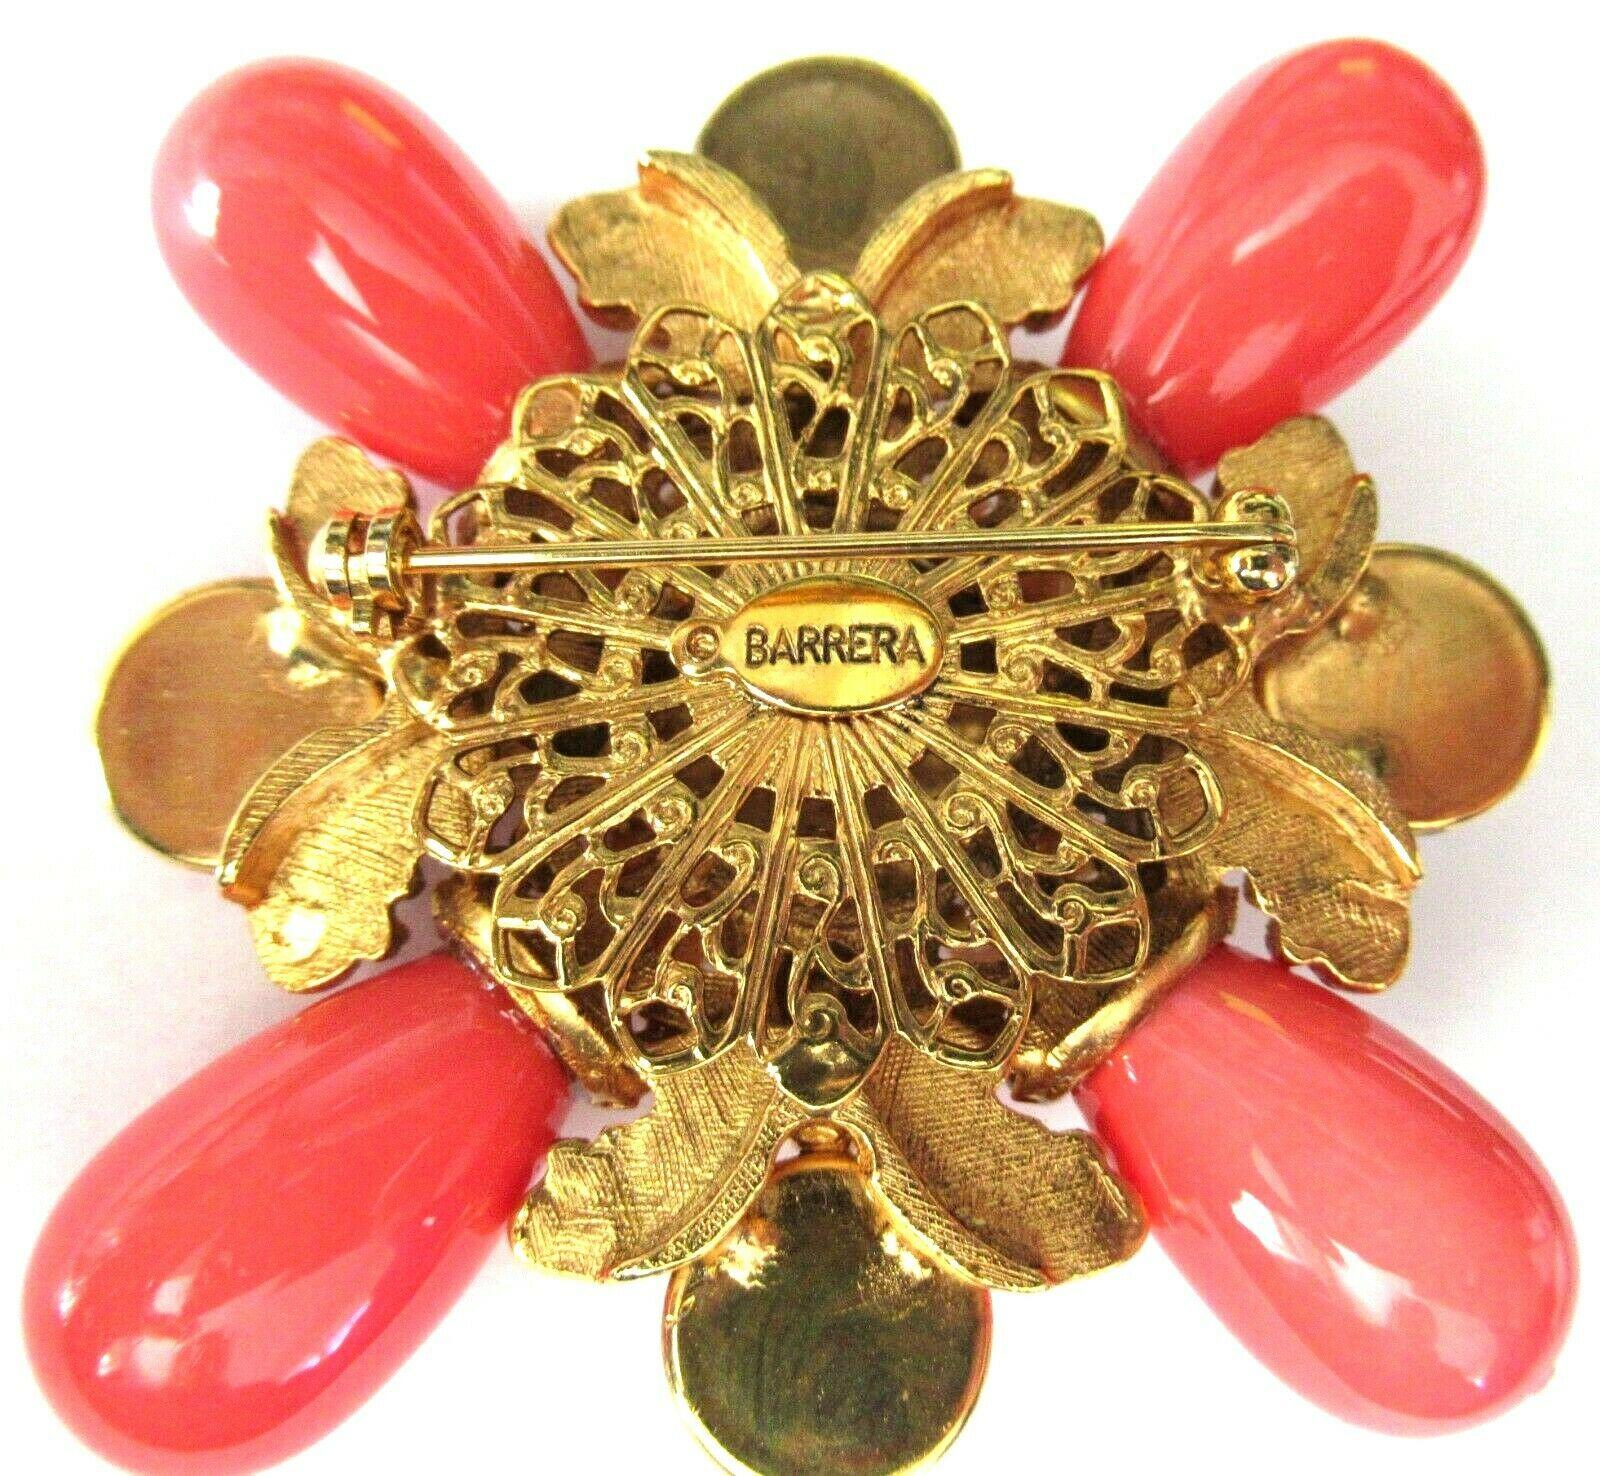 Signed Designer Barrera Statement Faux Coral Cross Brooch. Hand set with cabochon Faux Coral and accented by pearls. Measuring approx. 3” More Beautiful in real time...Chic and sure to be admired complement to your outfit! 
